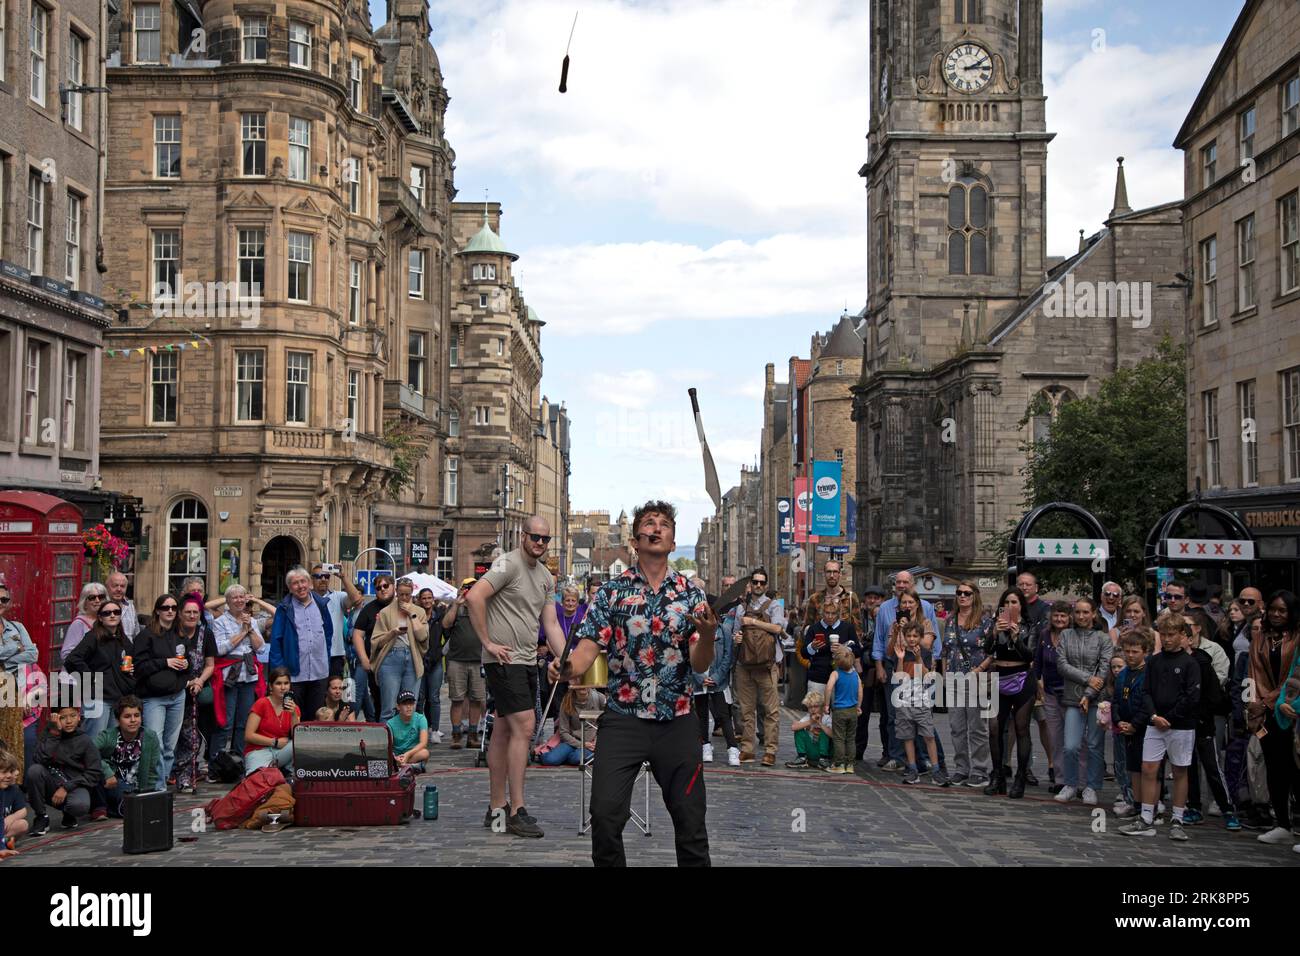 Royal Mile, Edinburgh, Scotland, UK. 24 August 2023.  Final sunny Thursday for street performers and those seeking entertainment on the High Street of the capital city. Streets are quiter than would be expected allowing more room for people to move around. Temperature around 18 degrees centigrade. Pictured: Street Performer juggler RobinVCurtis. Credit: Archwhite/alamy live news. Stock Photo